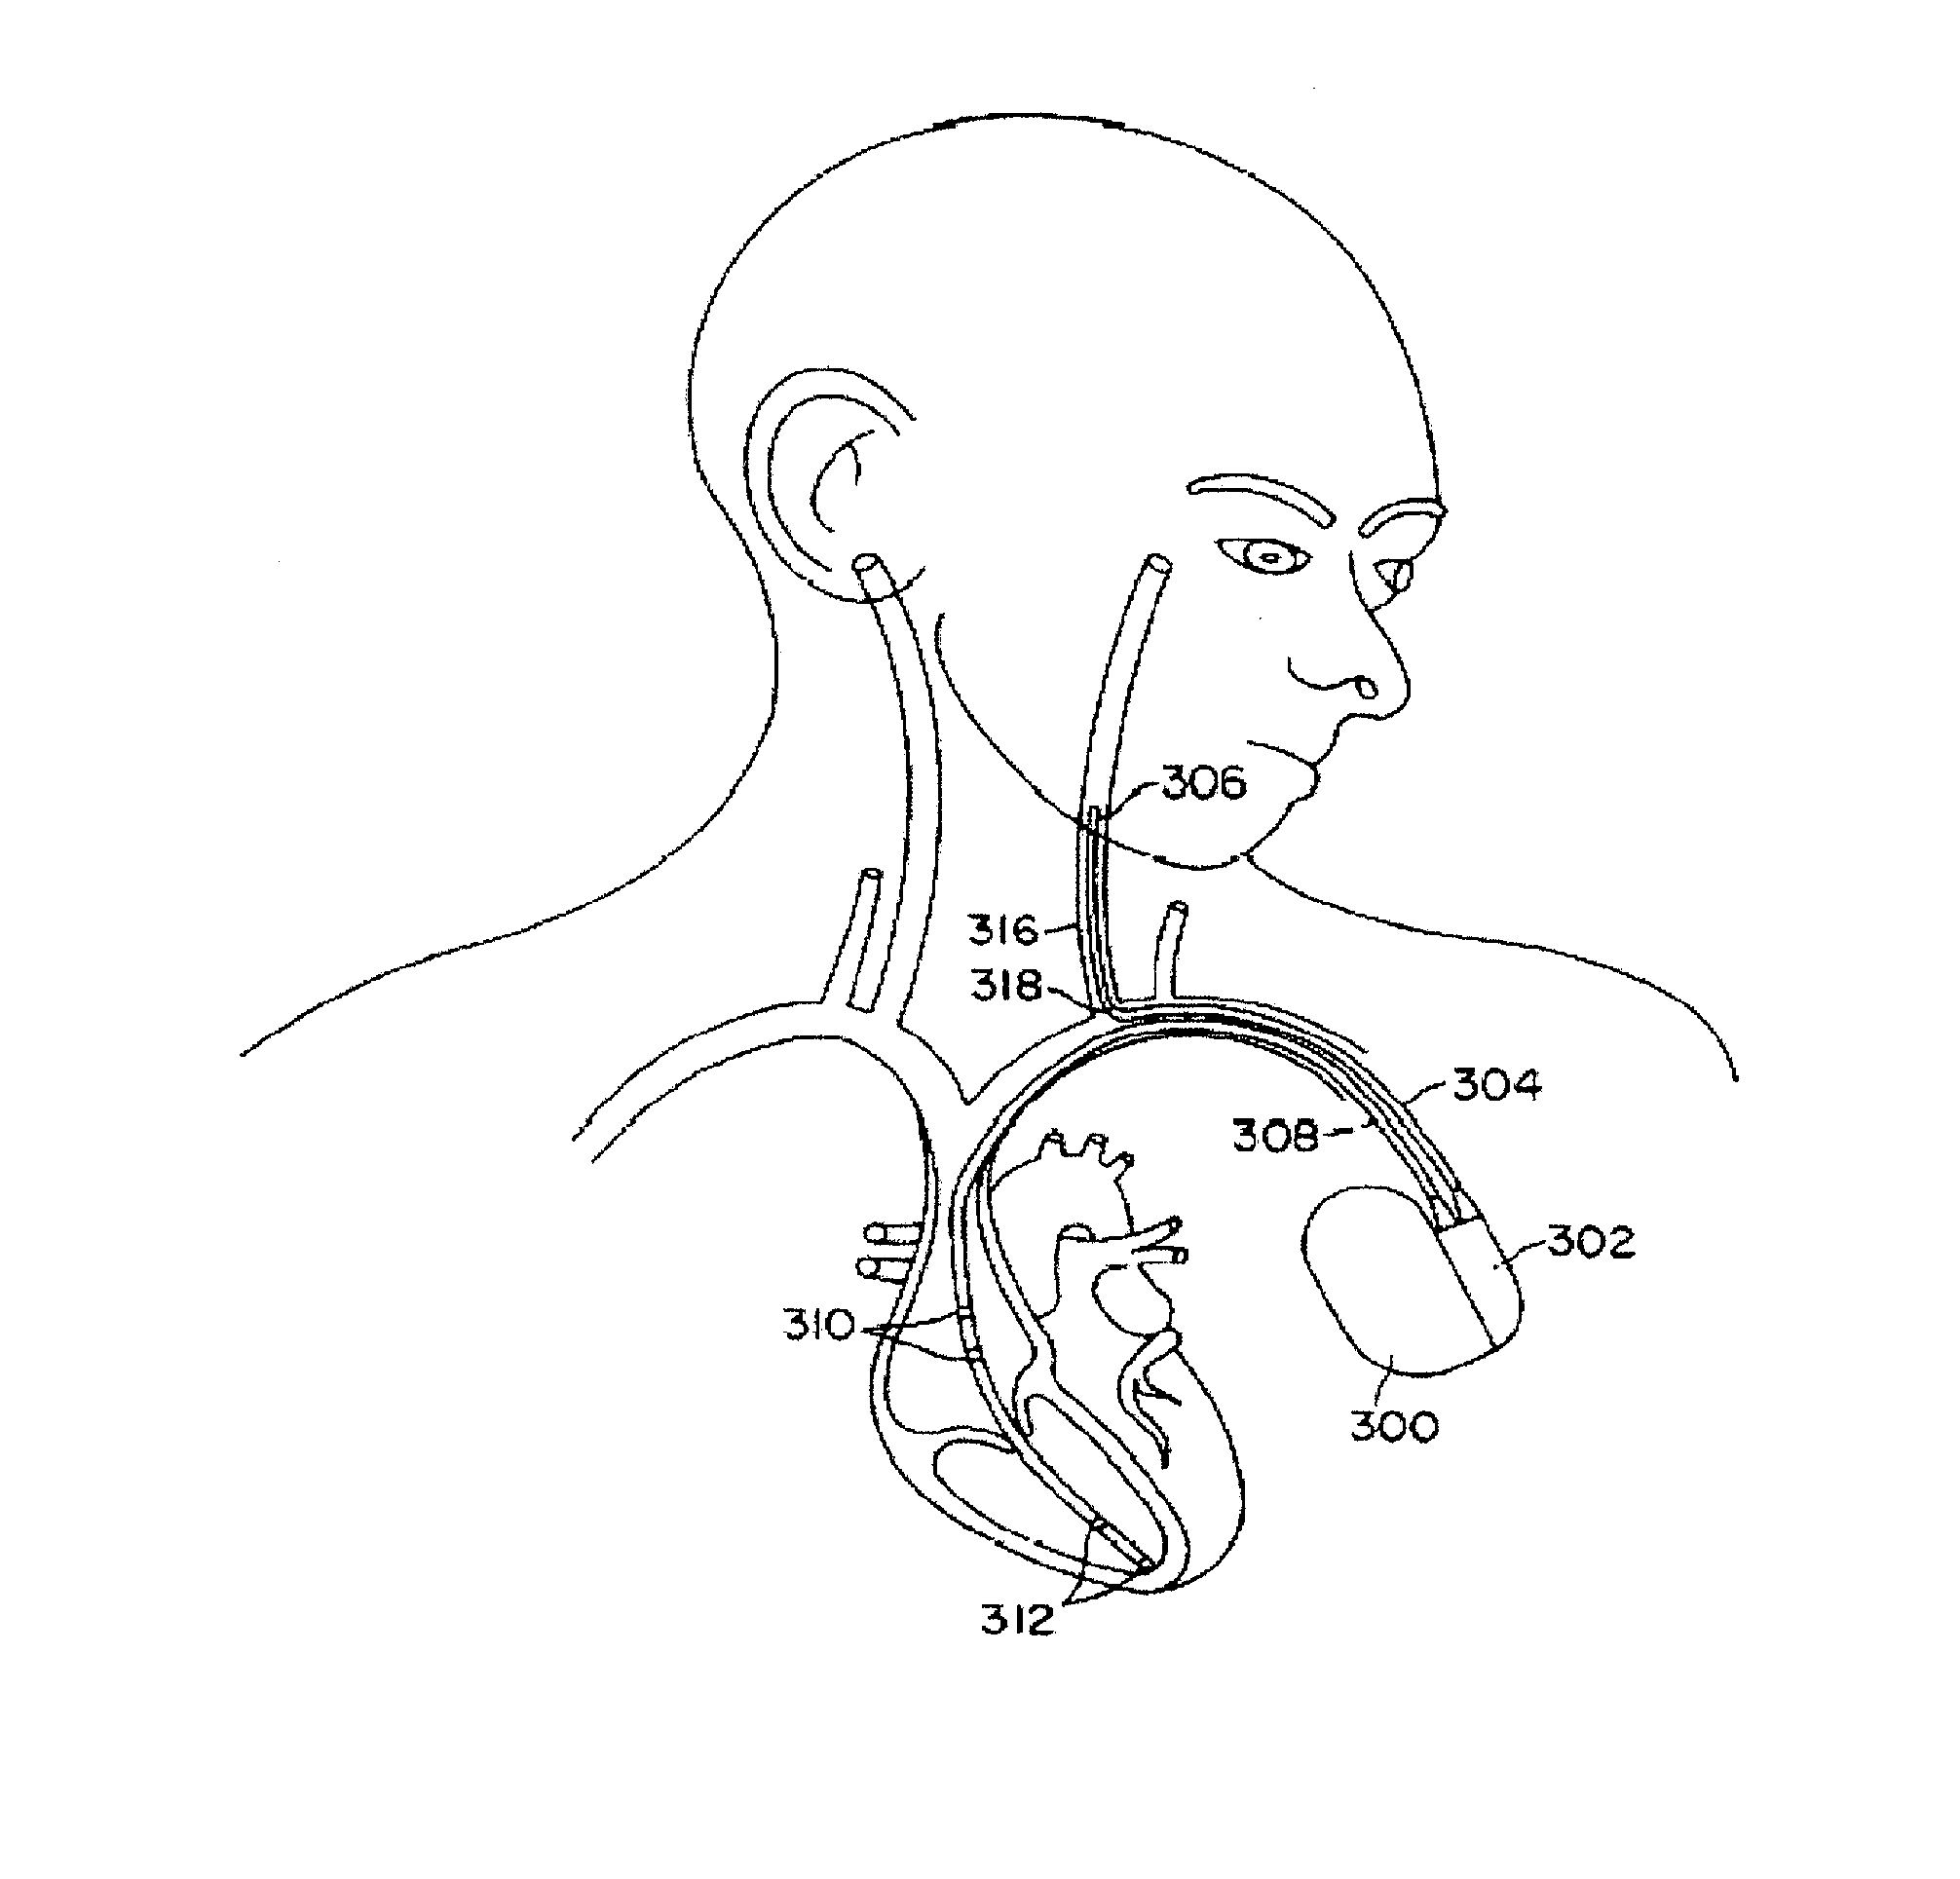 Method and system for vagal nerve stimulation with multi-site cardiac pacing